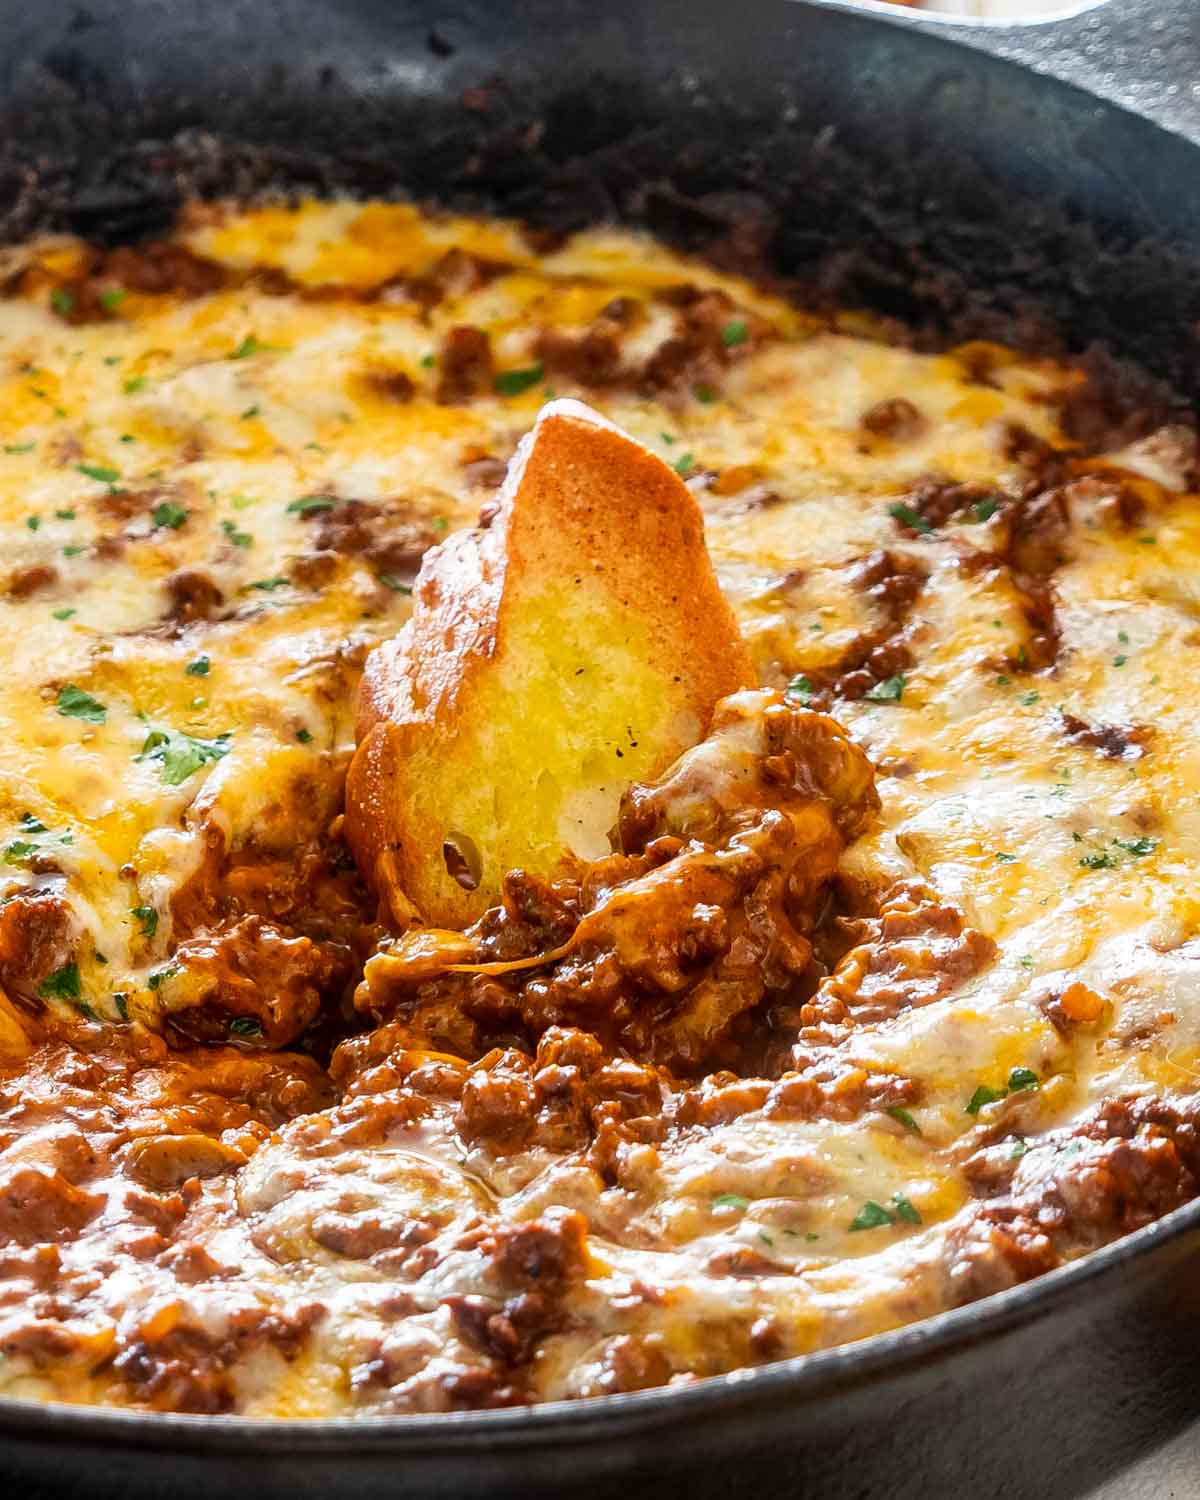 sloppy joe dip in a black skillet with a piece of toasted bread in it.